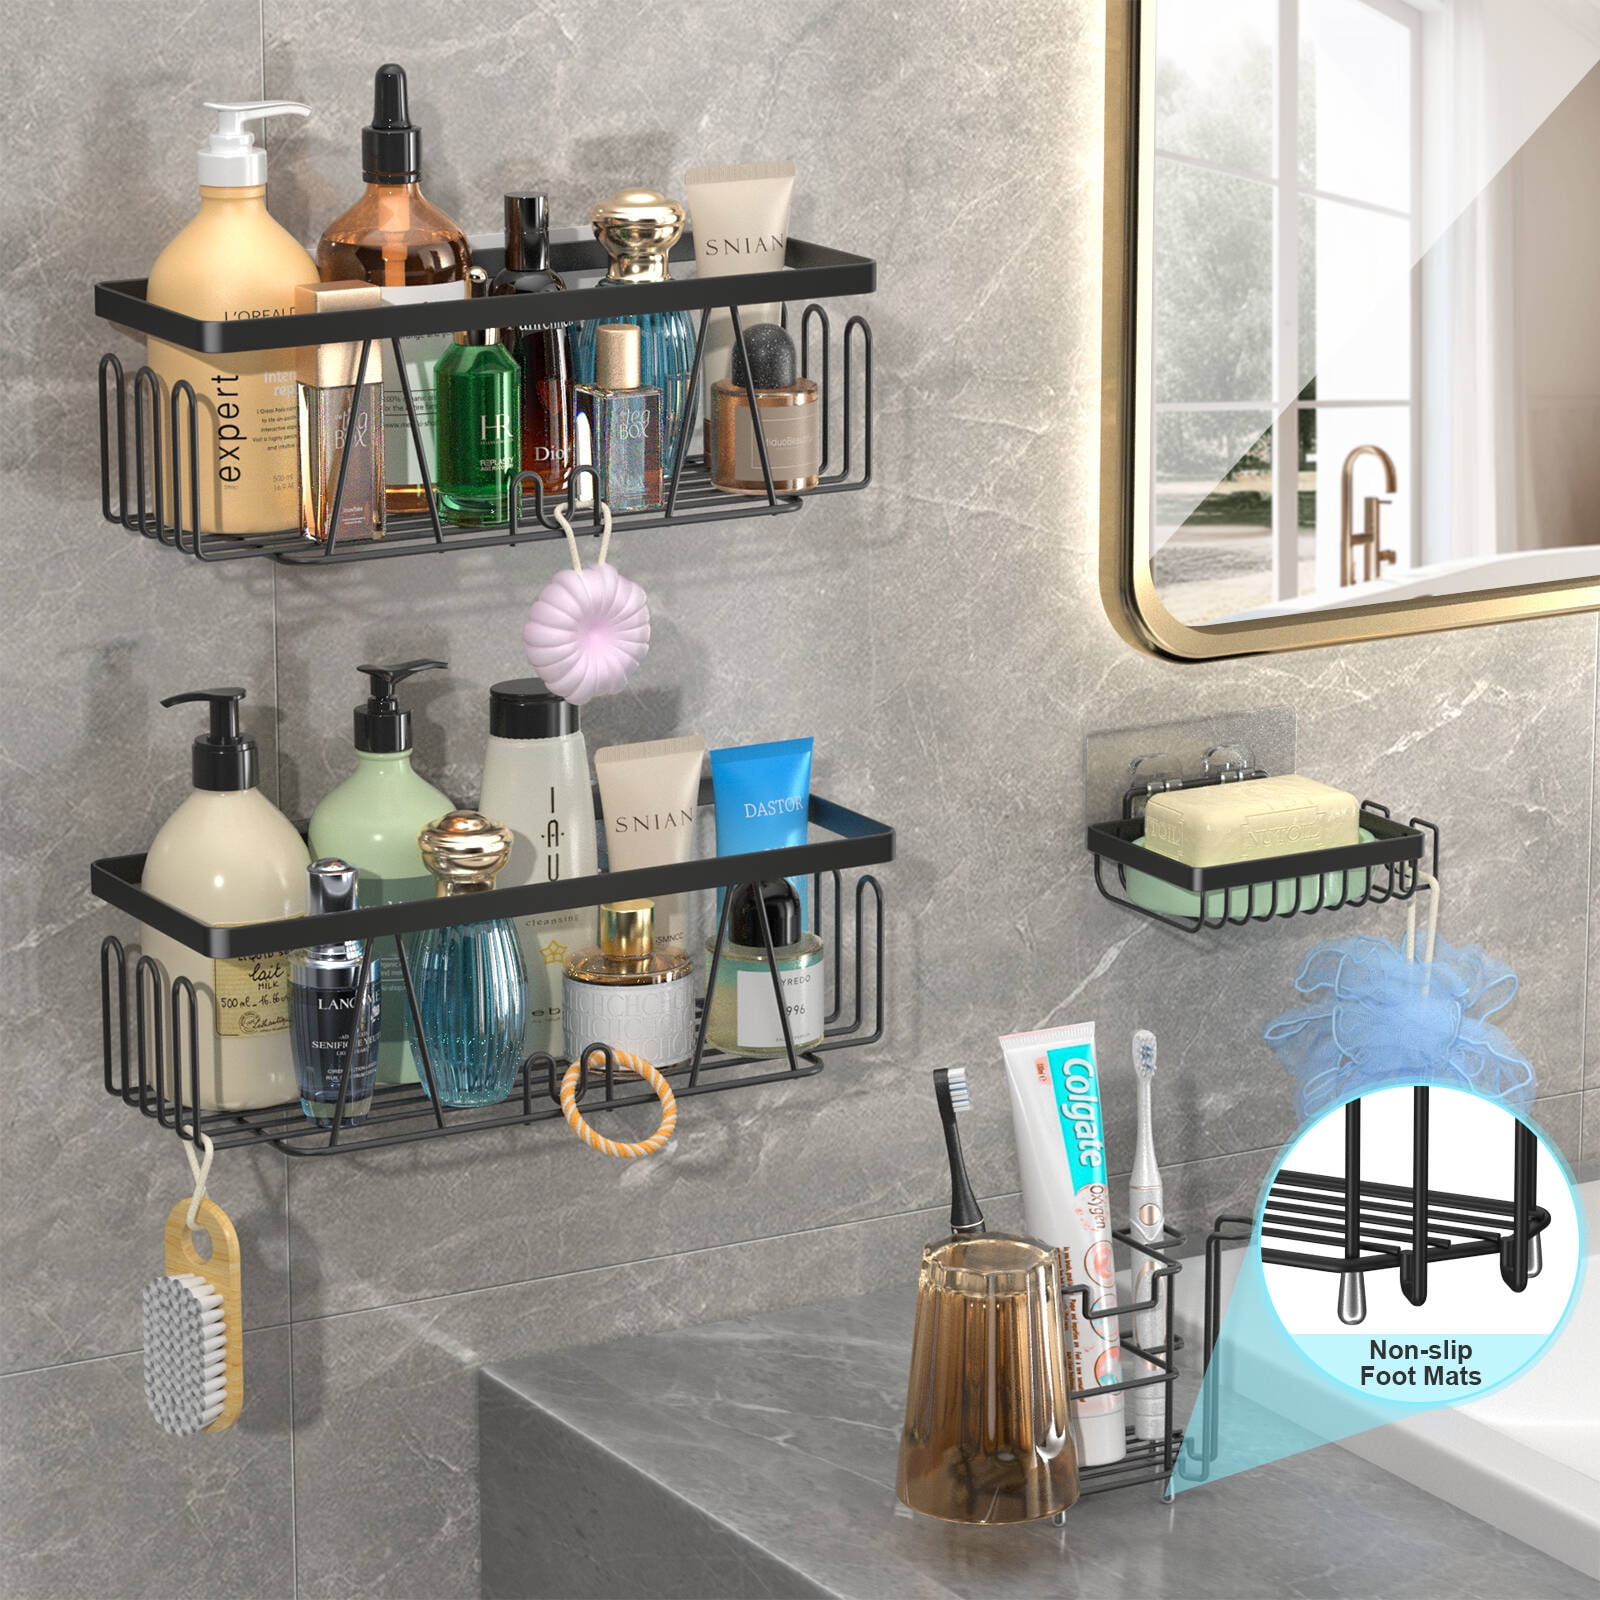 stusgo Shower Shelf for Bathroom, Adhesive Shower Caddy with Soap